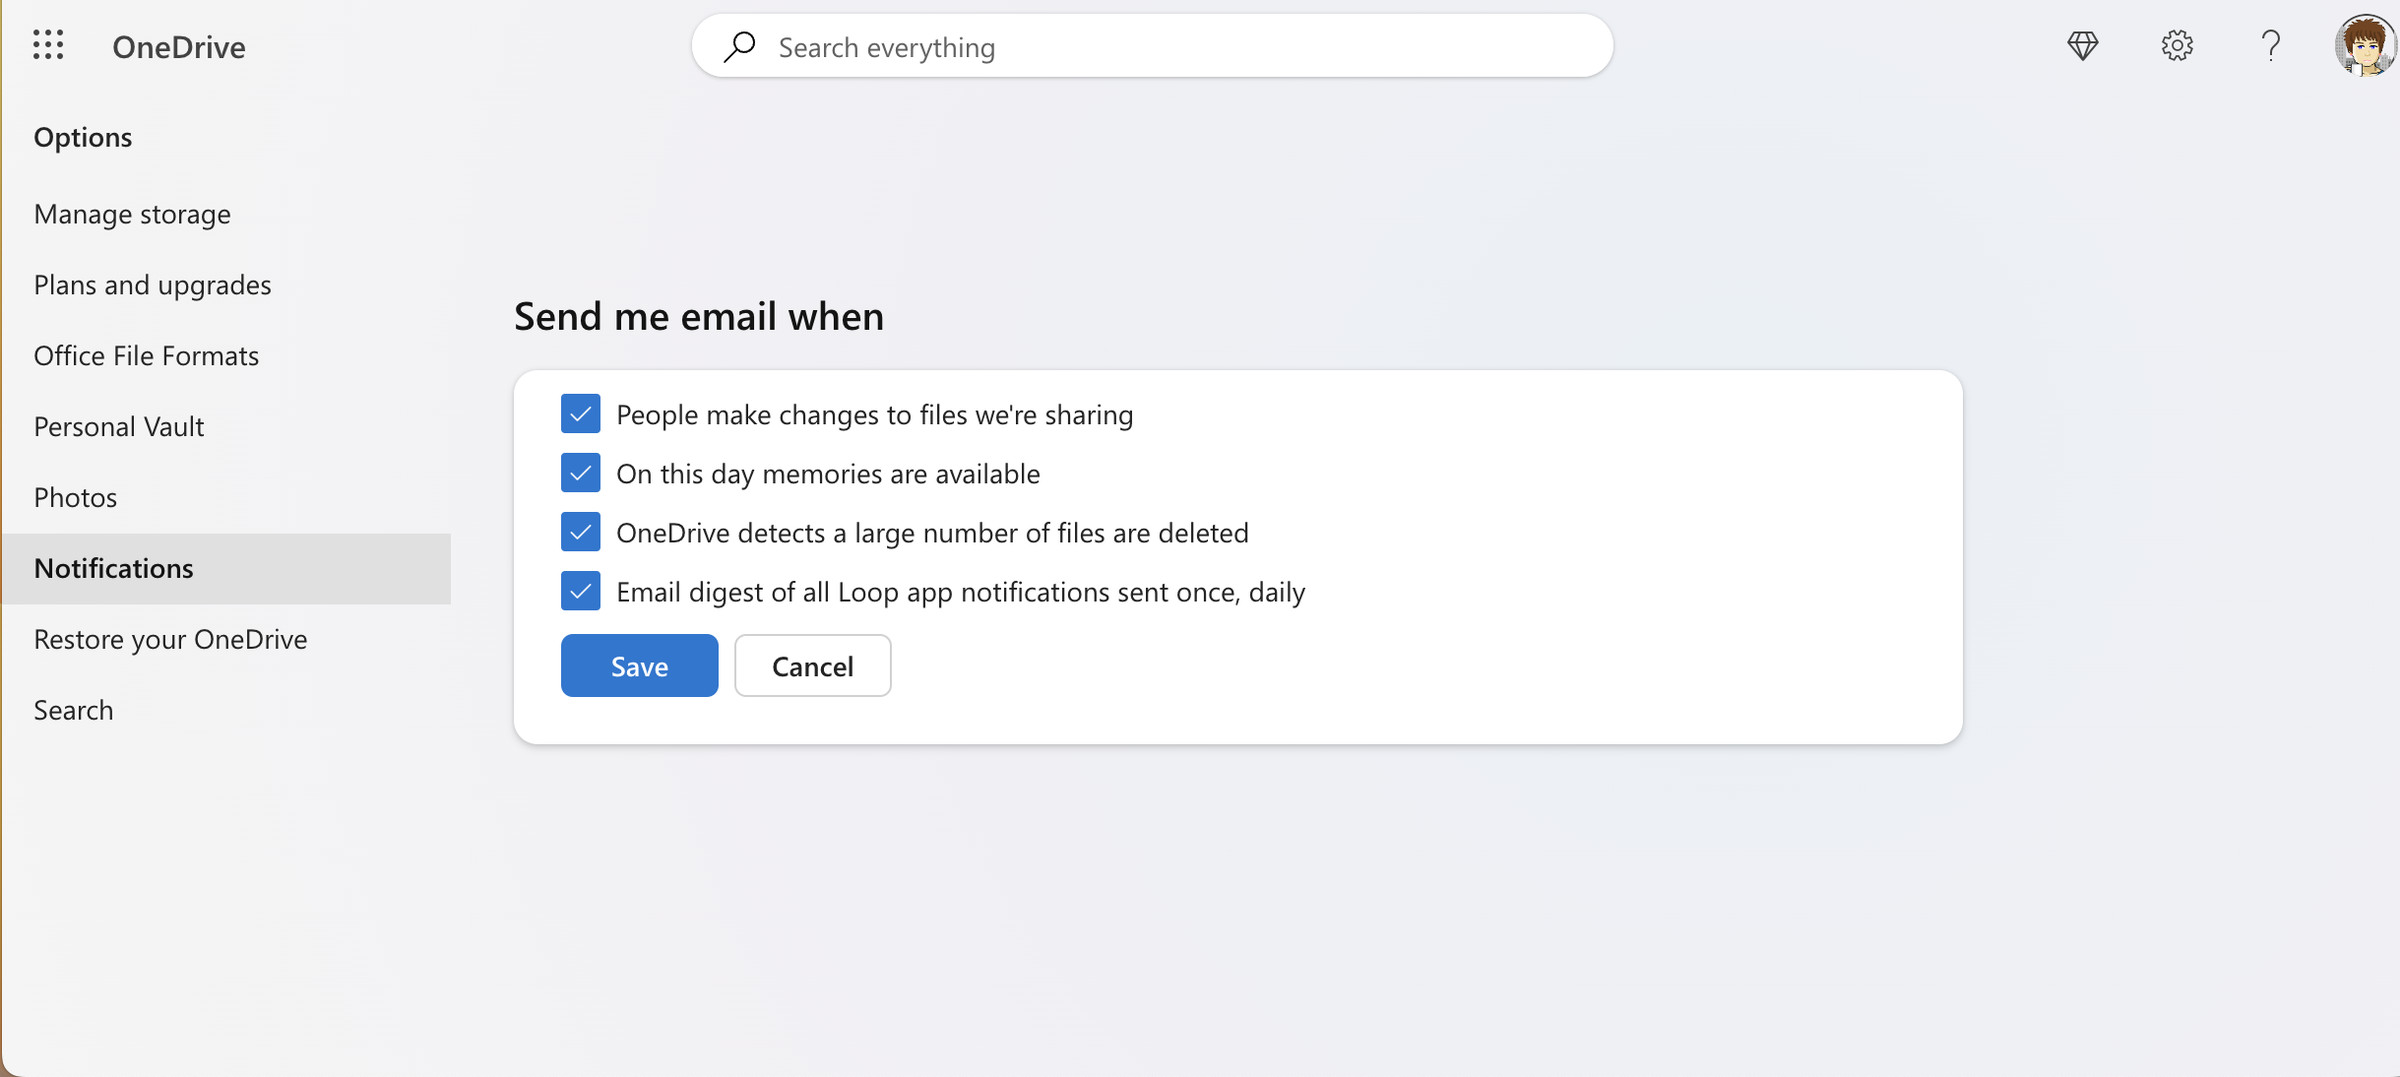 OneDrive page showing options for “Send me email when”